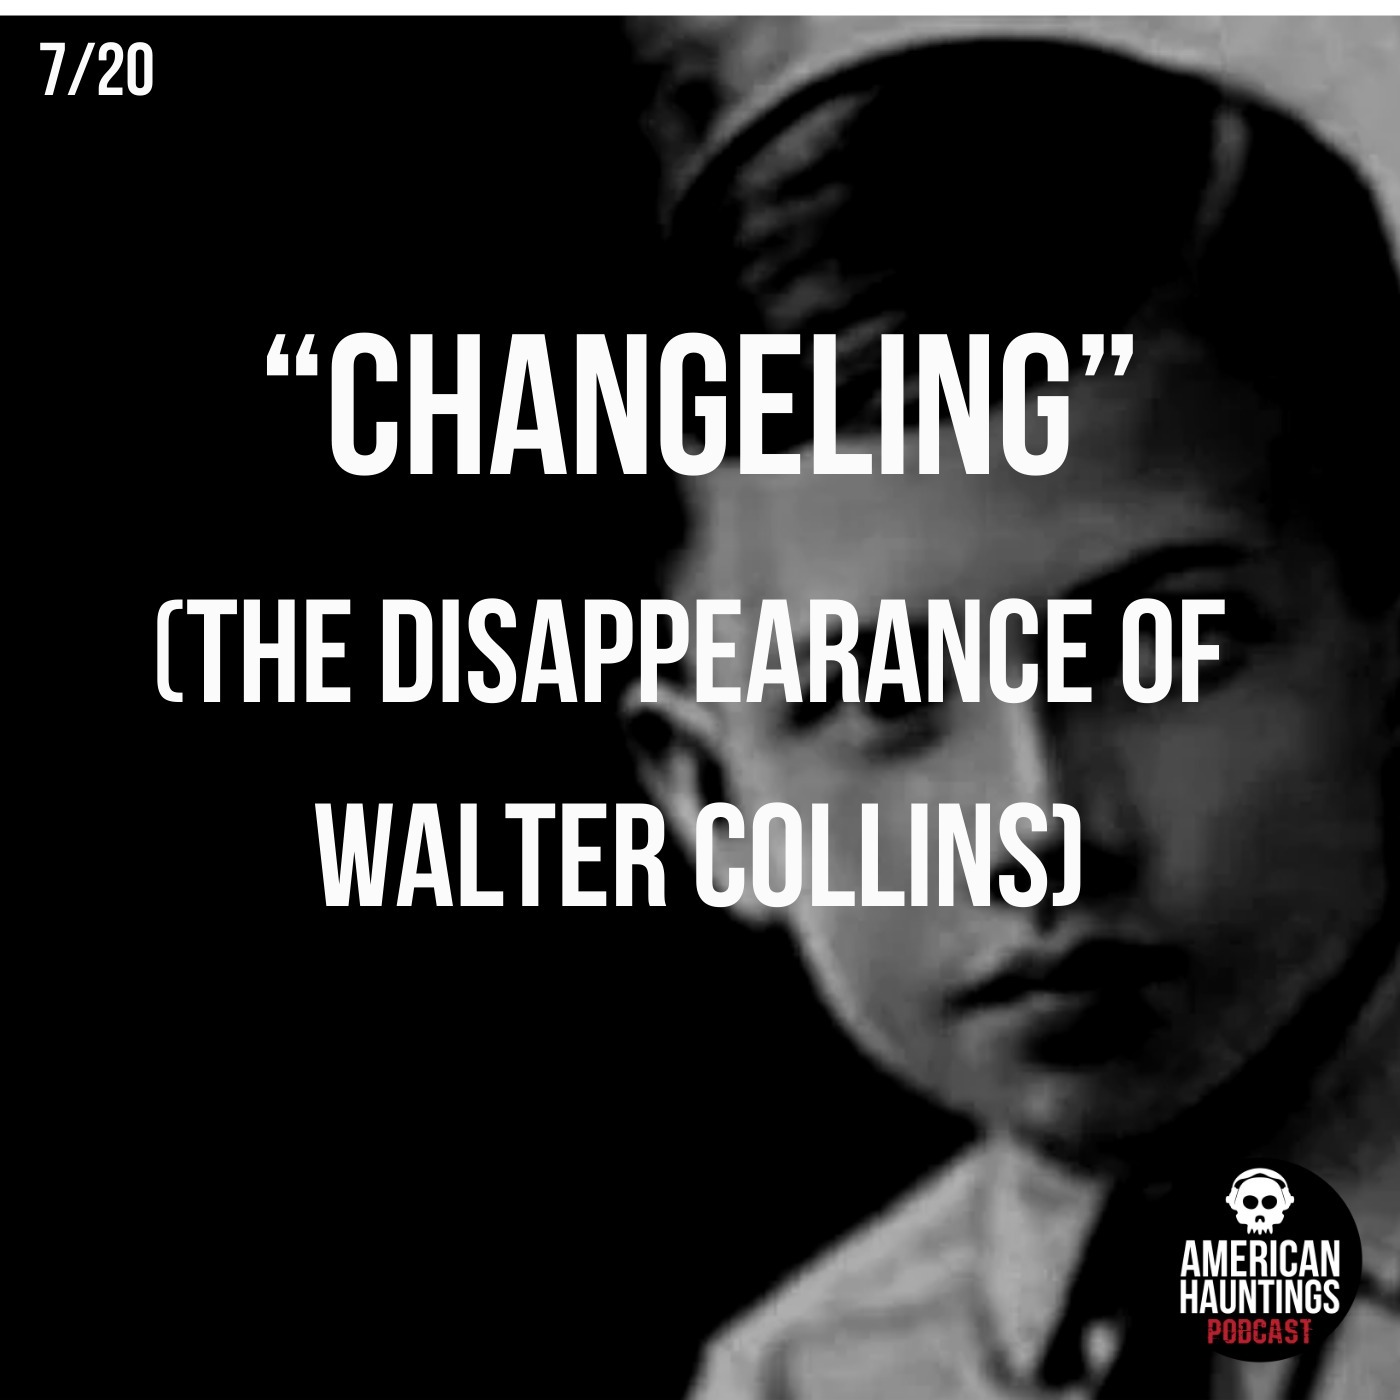 Changeling: The Disappearance Of Walter Collins